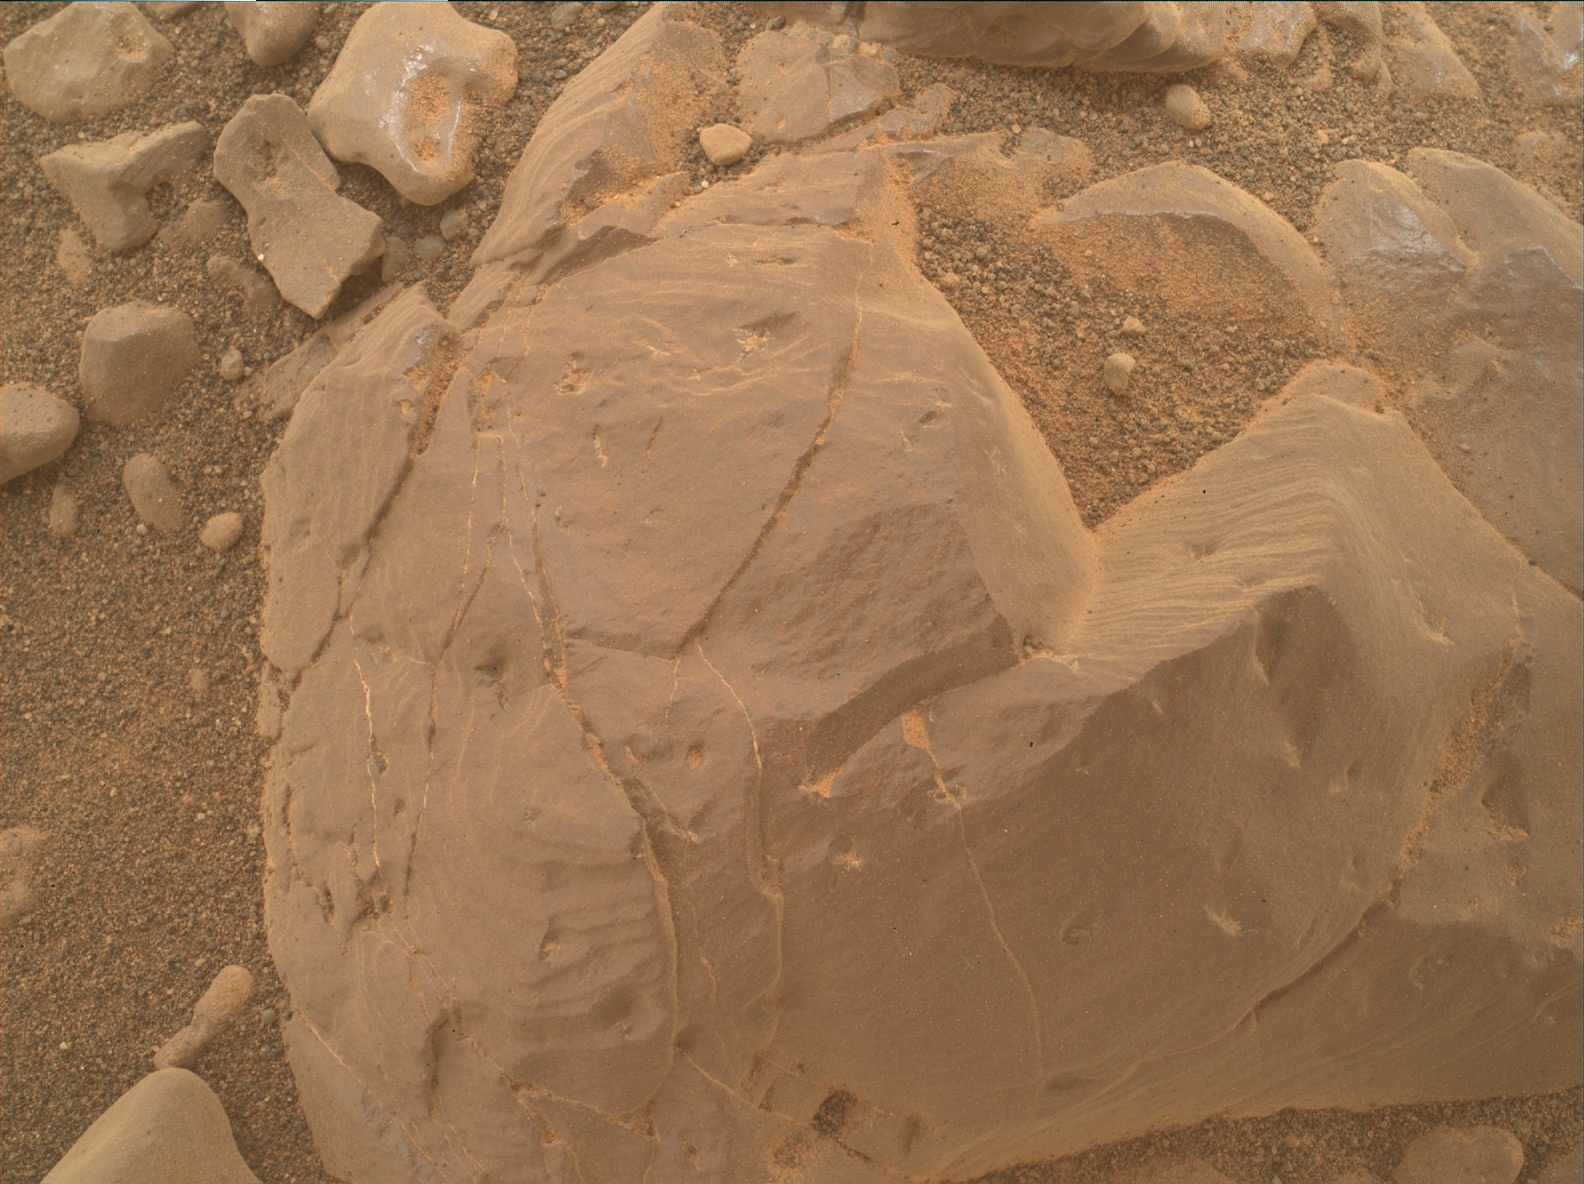 Nasa's Mars rover Curiosity acquired this image using its Mars Hand Lens Imager (MAHLI) on Sol 2299